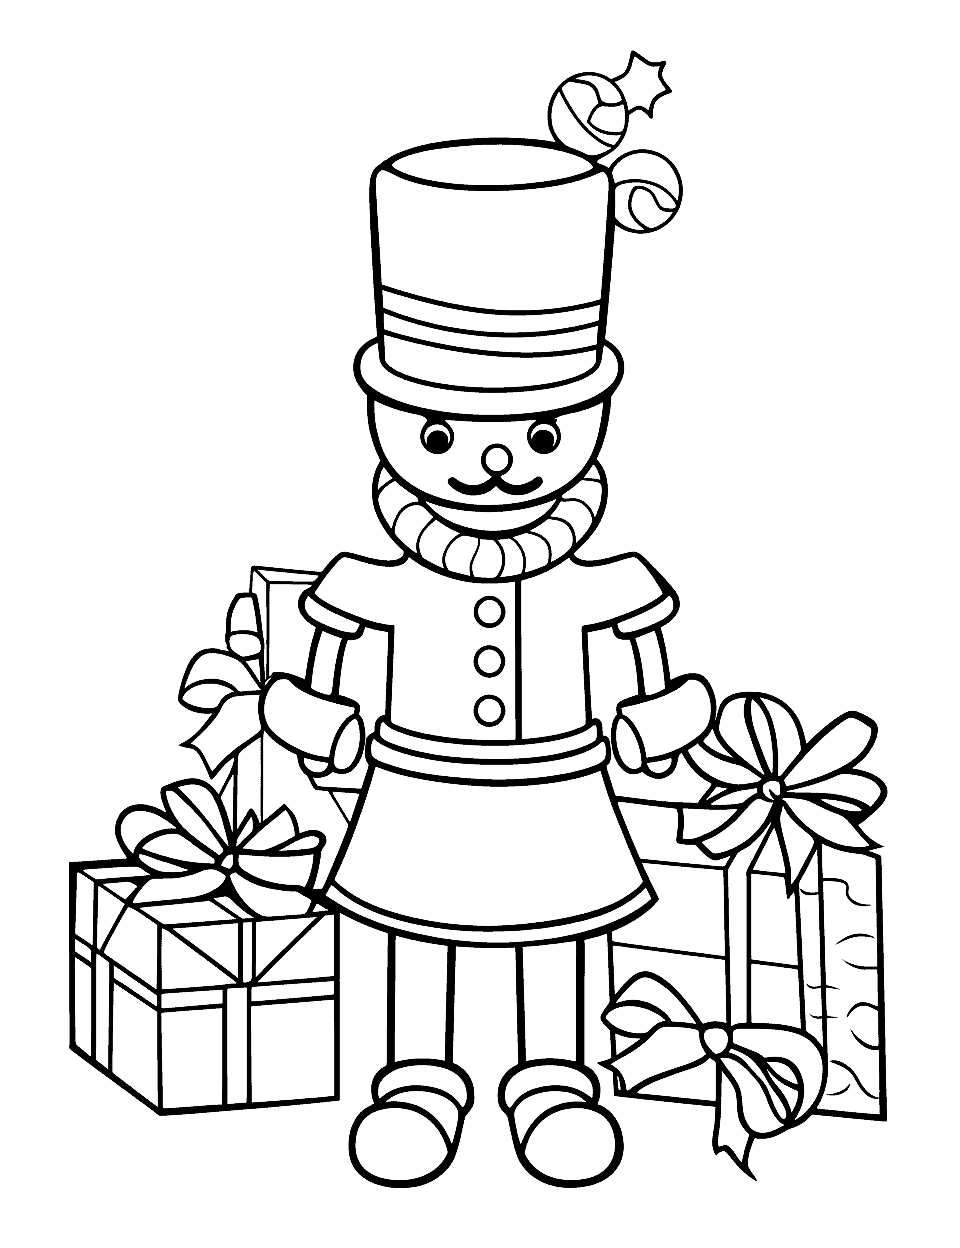 Toy Soldier Guard Christmas Coloring Page - A toy soldier standing guard next to a pile of wrapped presents.